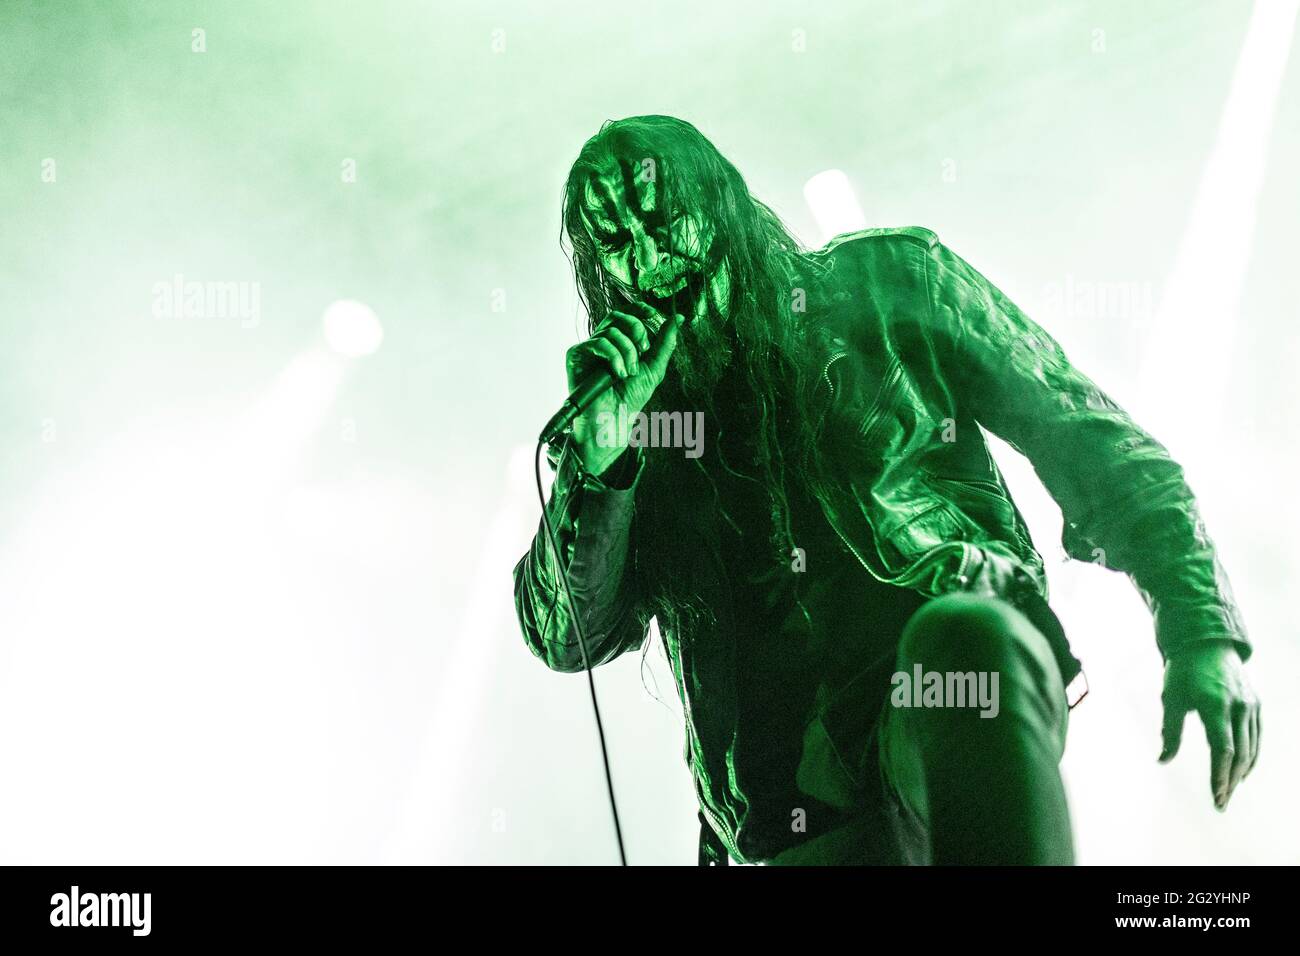 Oslo, Norway. 12th June, 2021. The Norwegian black metal band Gaahls Wyrd performs a live concert at Sentrum Scene in Oslo. Here vocalist Gaahl is seen live on stage. (Photo Credit: Gonzales Photo/Alamy Live News Stock Photo